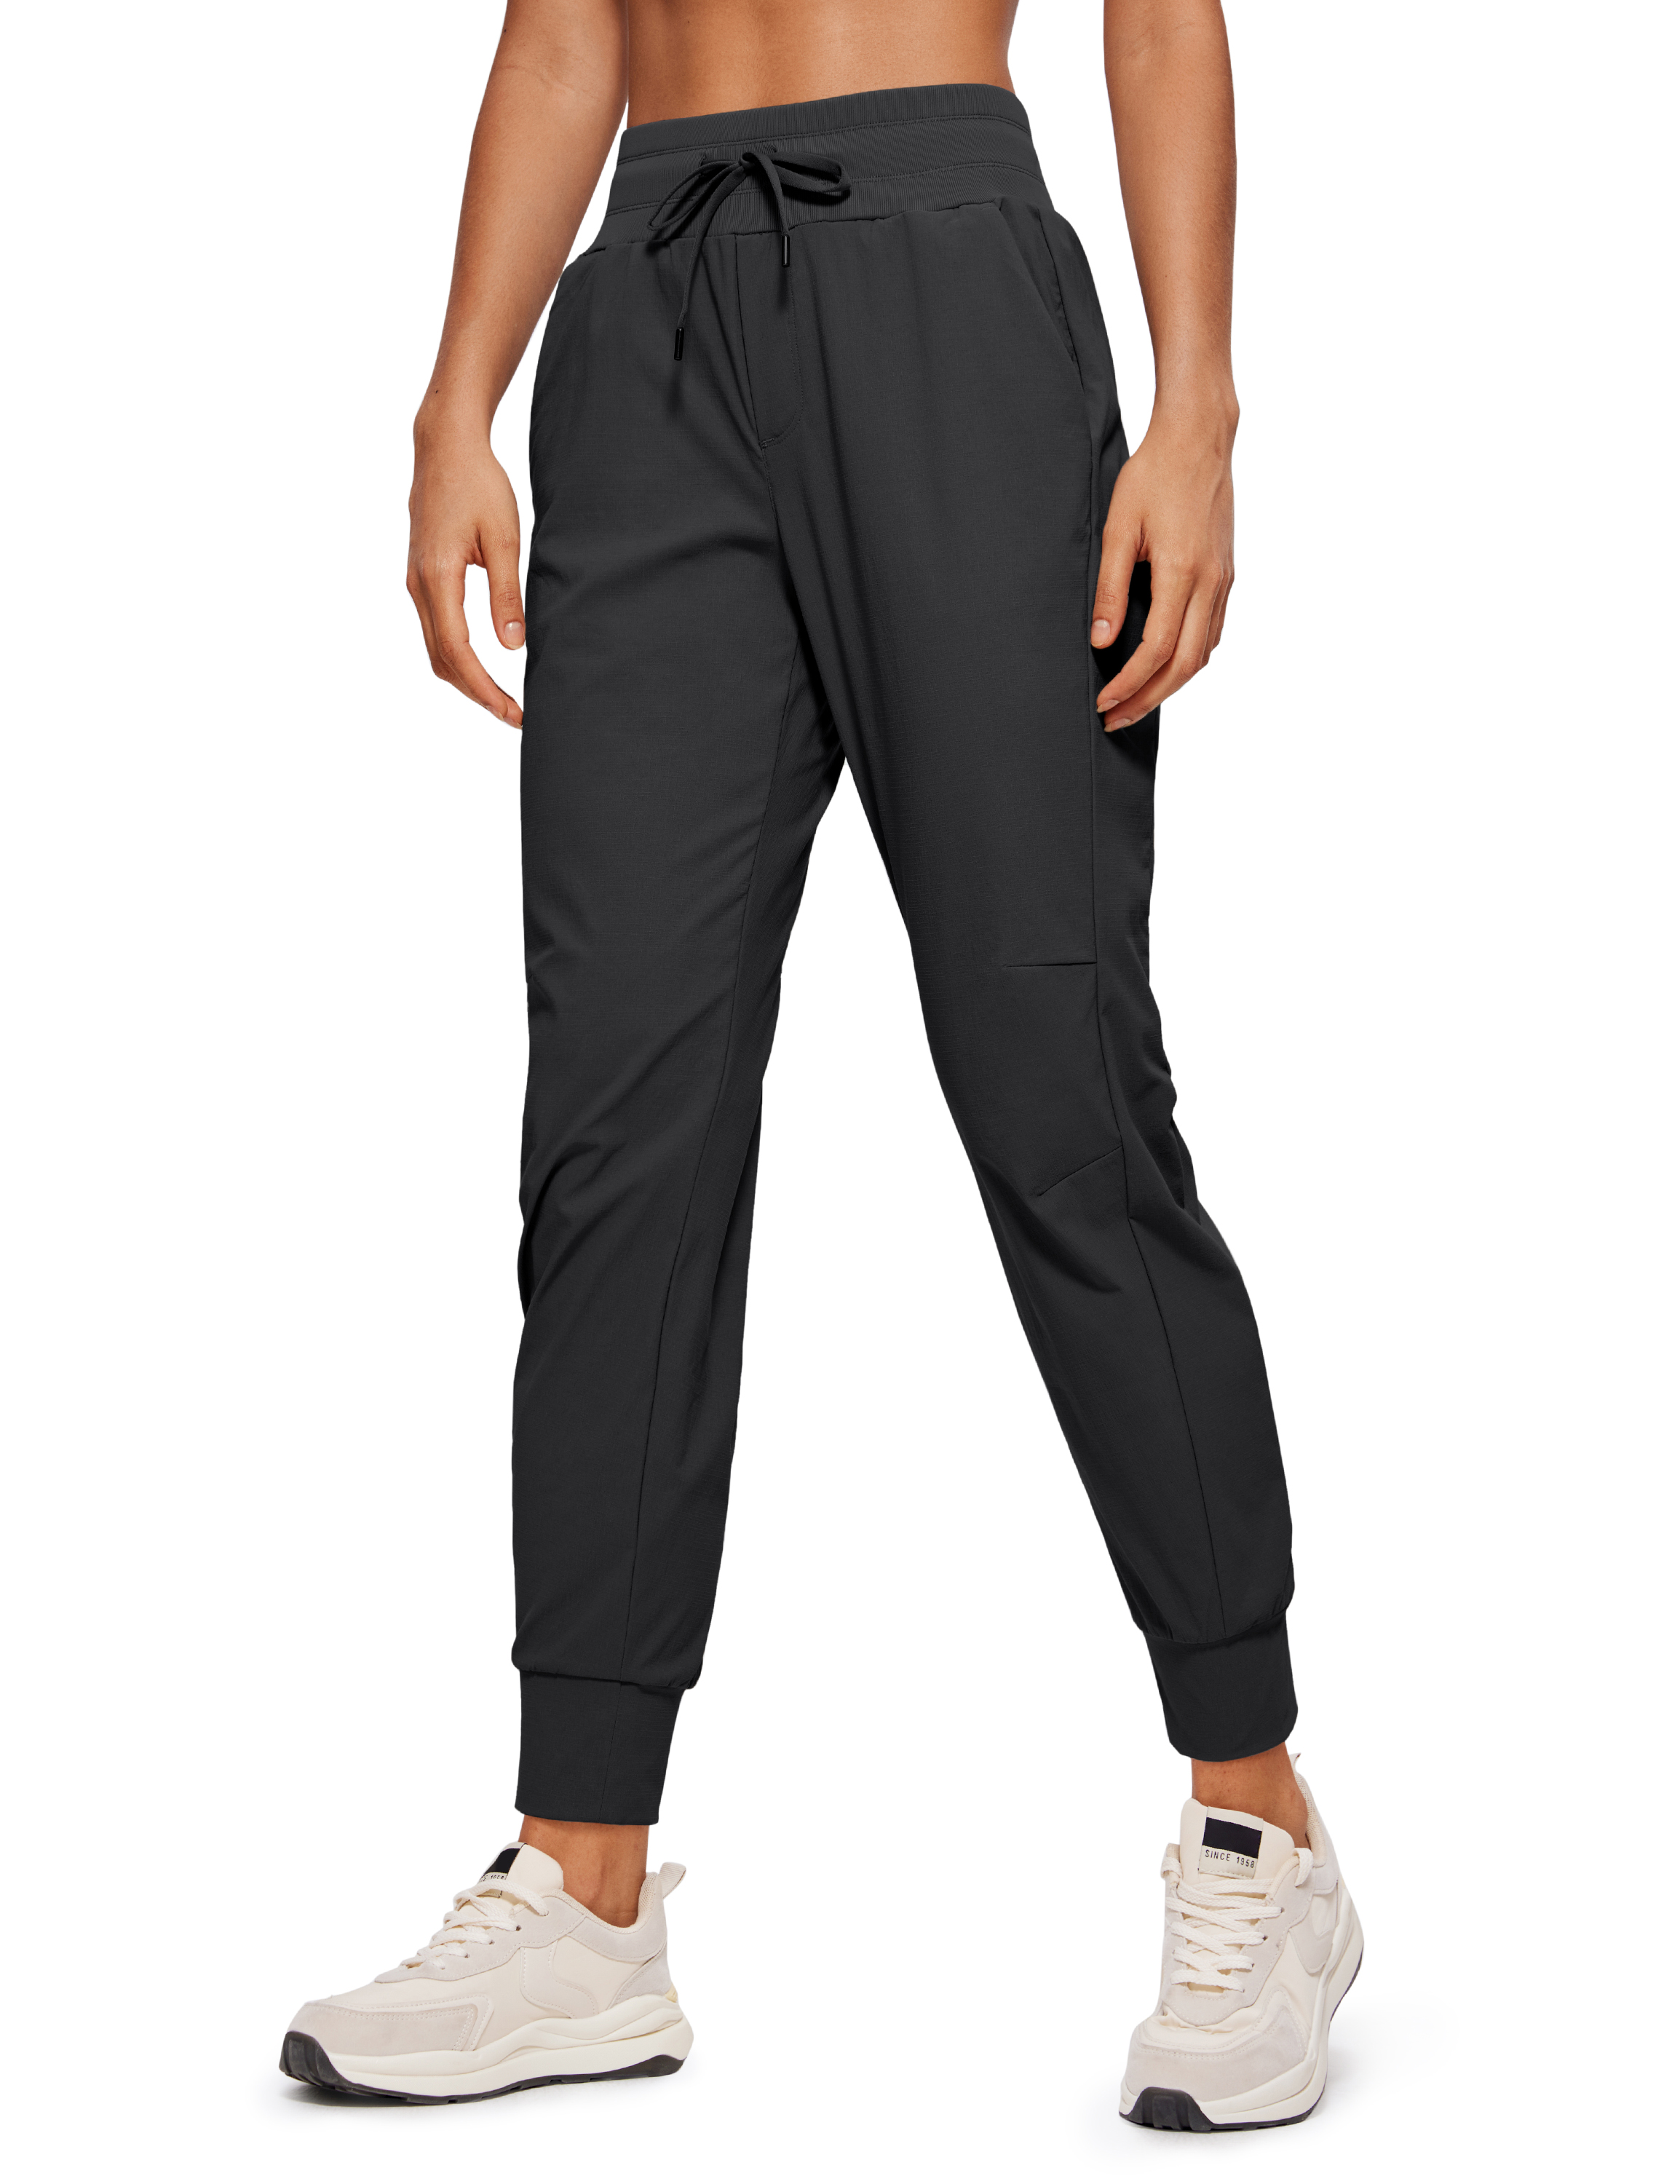 CRZ YOGA Ripstop Jogger for Women 27.5 Inches Trave Hiking Pants